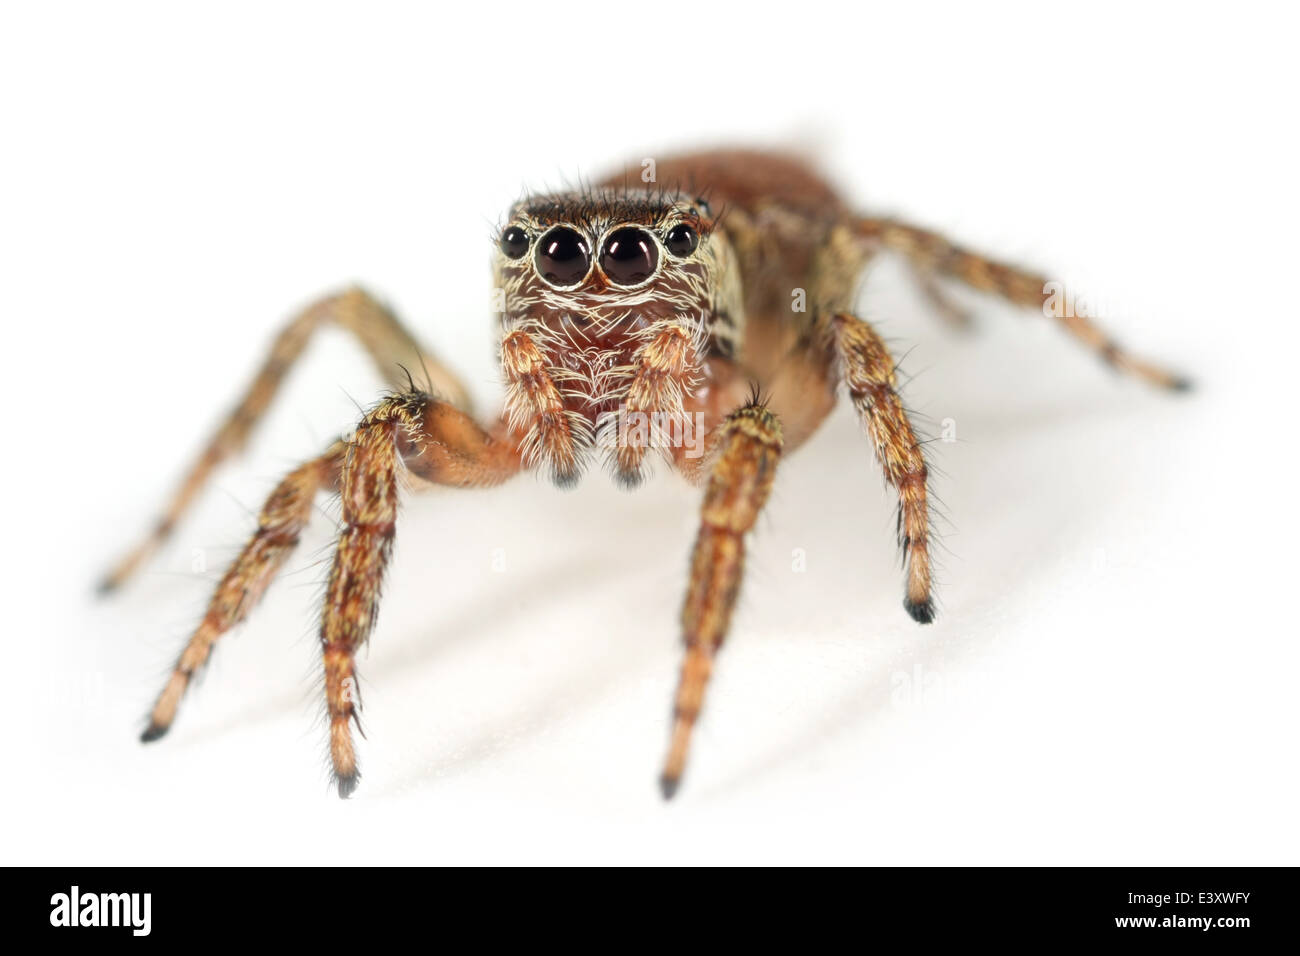 Female Evarcha falcata spider, part of the family Salticidae -  Jumping spiders. Head-on view Stock Photo